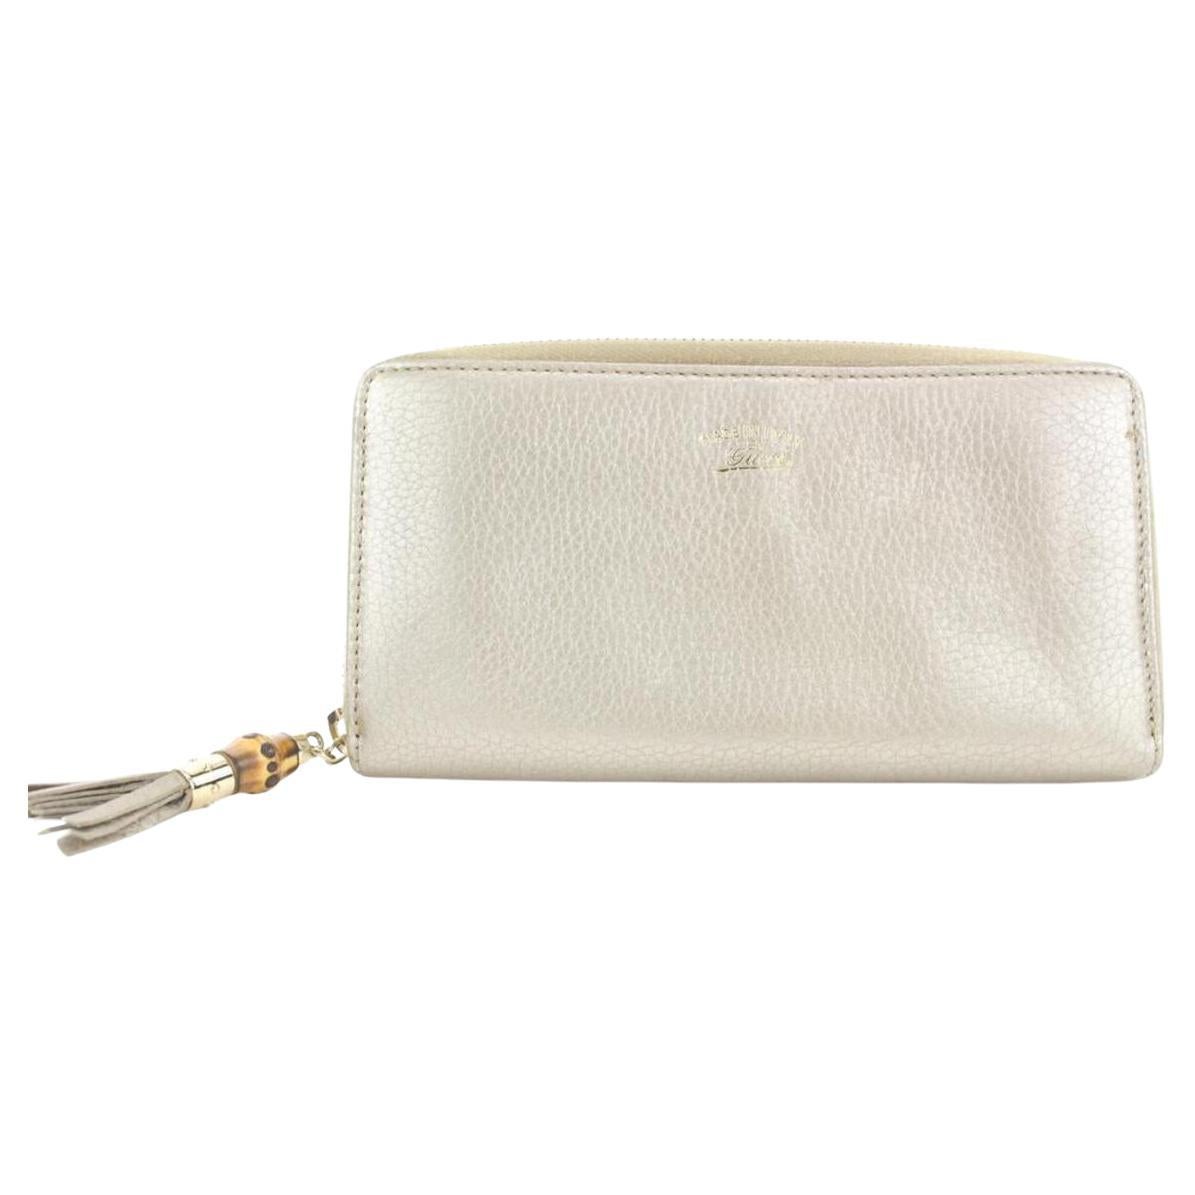 Gucci Gold Leather Bamboo Tassel Zip Around Continental Wallet Zippy 17ga113 For Sale